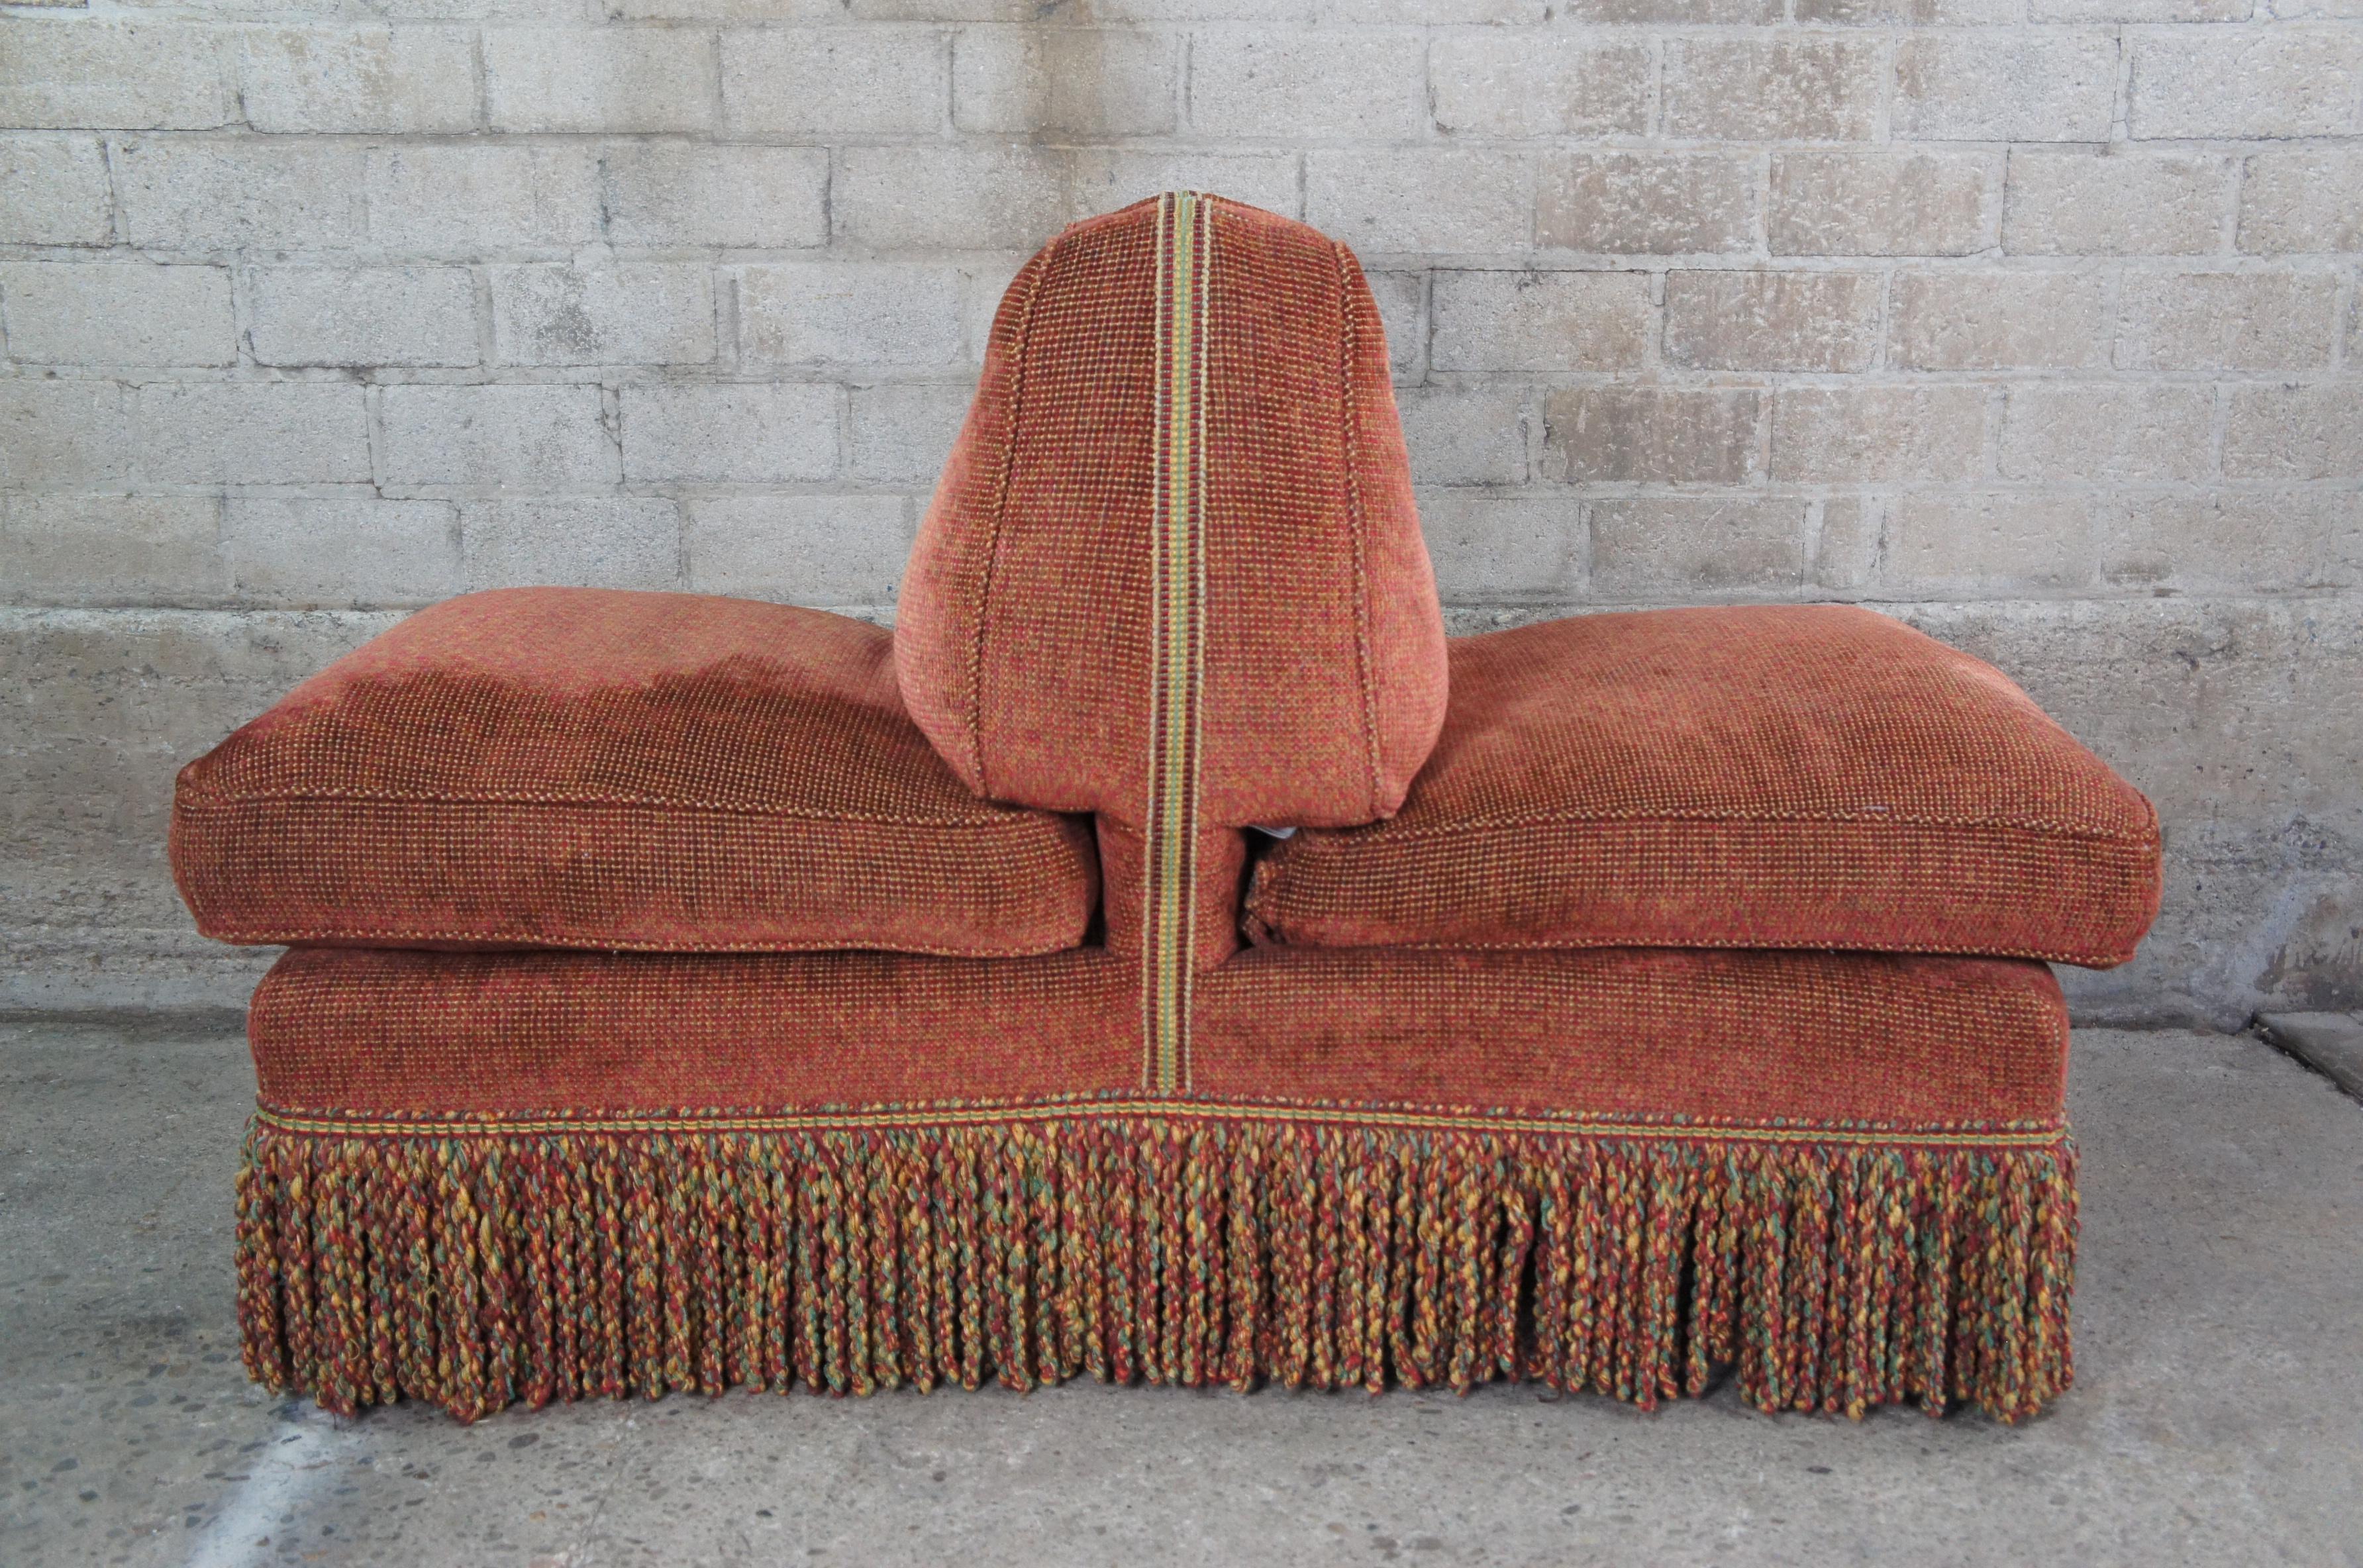 Upholstery Vintage Scalamandre Tete a Tete Double Seat Settee Bench Lounge Chair